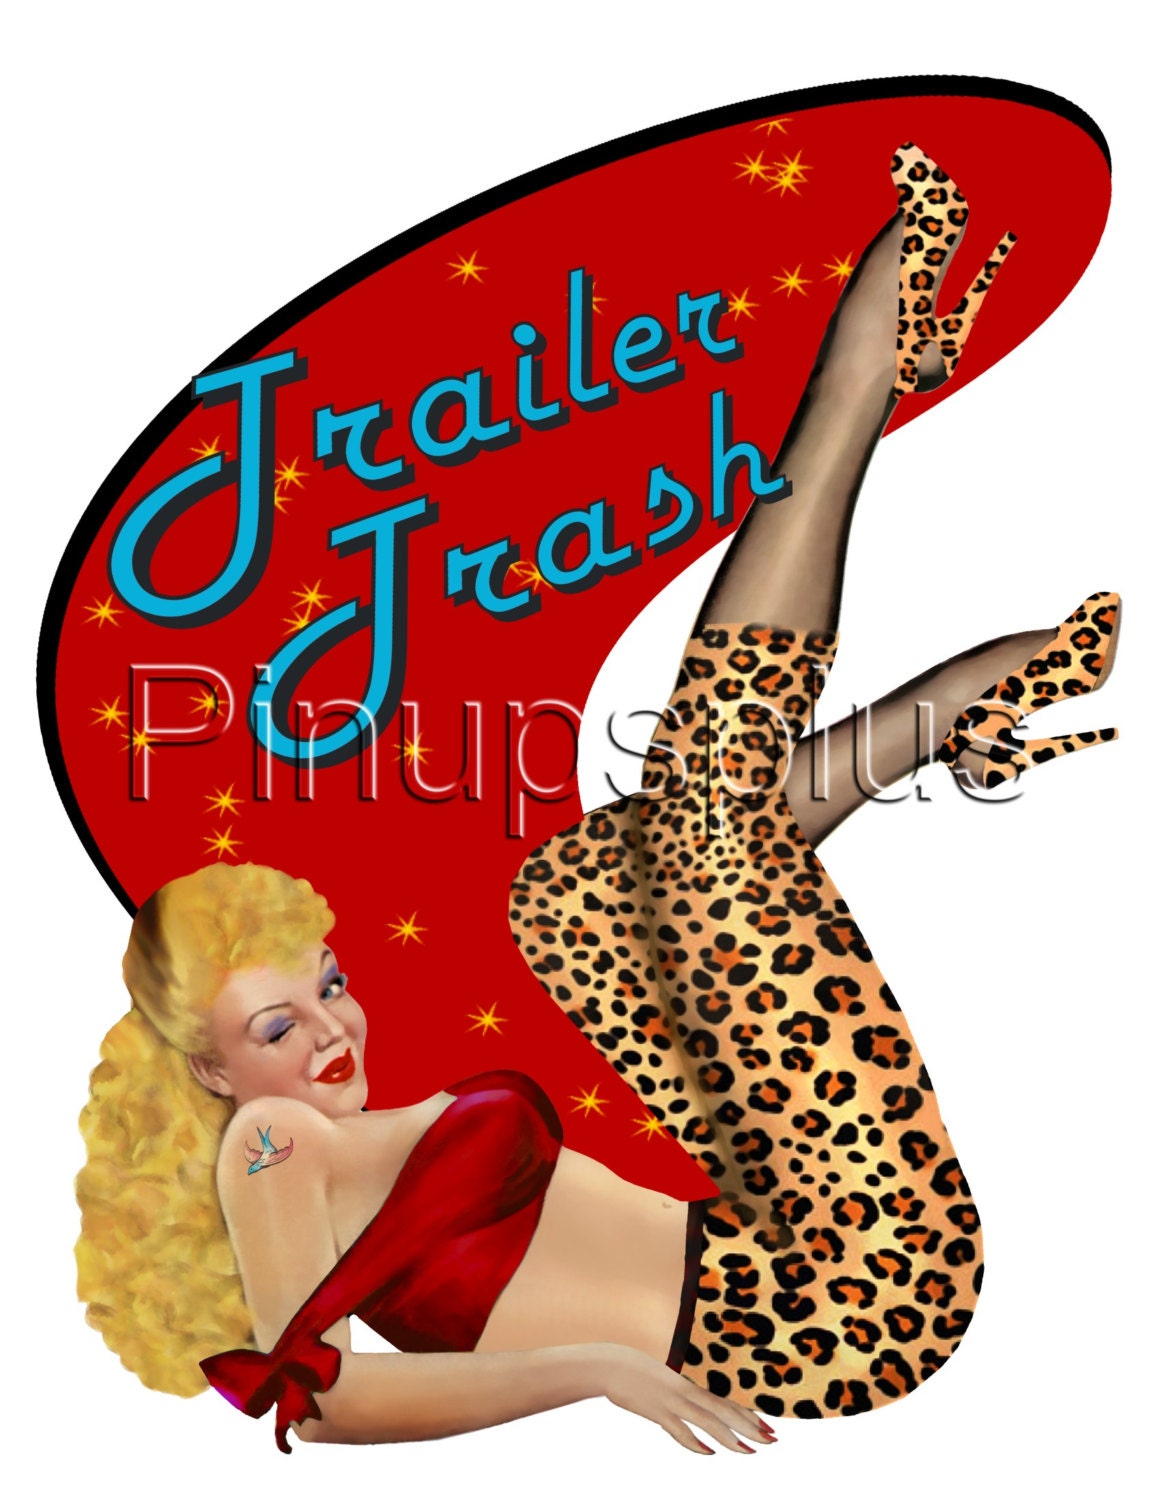 Sexy Hillbilly Trailer Trash Blond Pinup Girl In Leopard Print